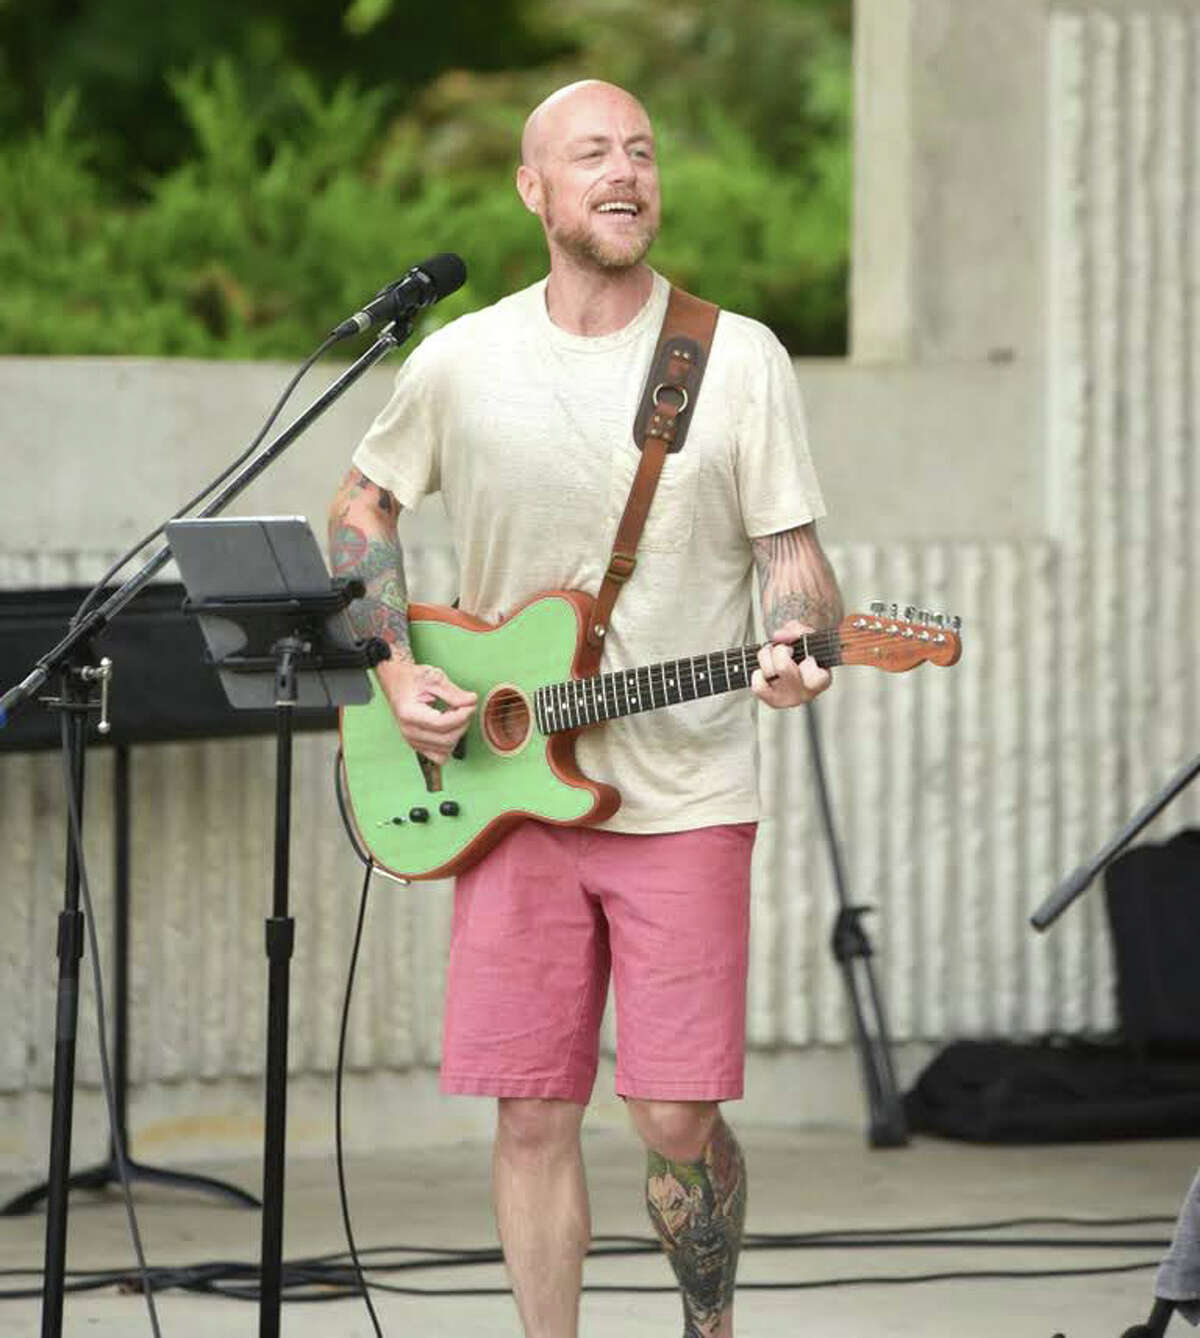 Big Rapids resident and real estate agent Chris Jane visited the Mecosta County Jail last week to perform some entertaining music and engage with inmates. 